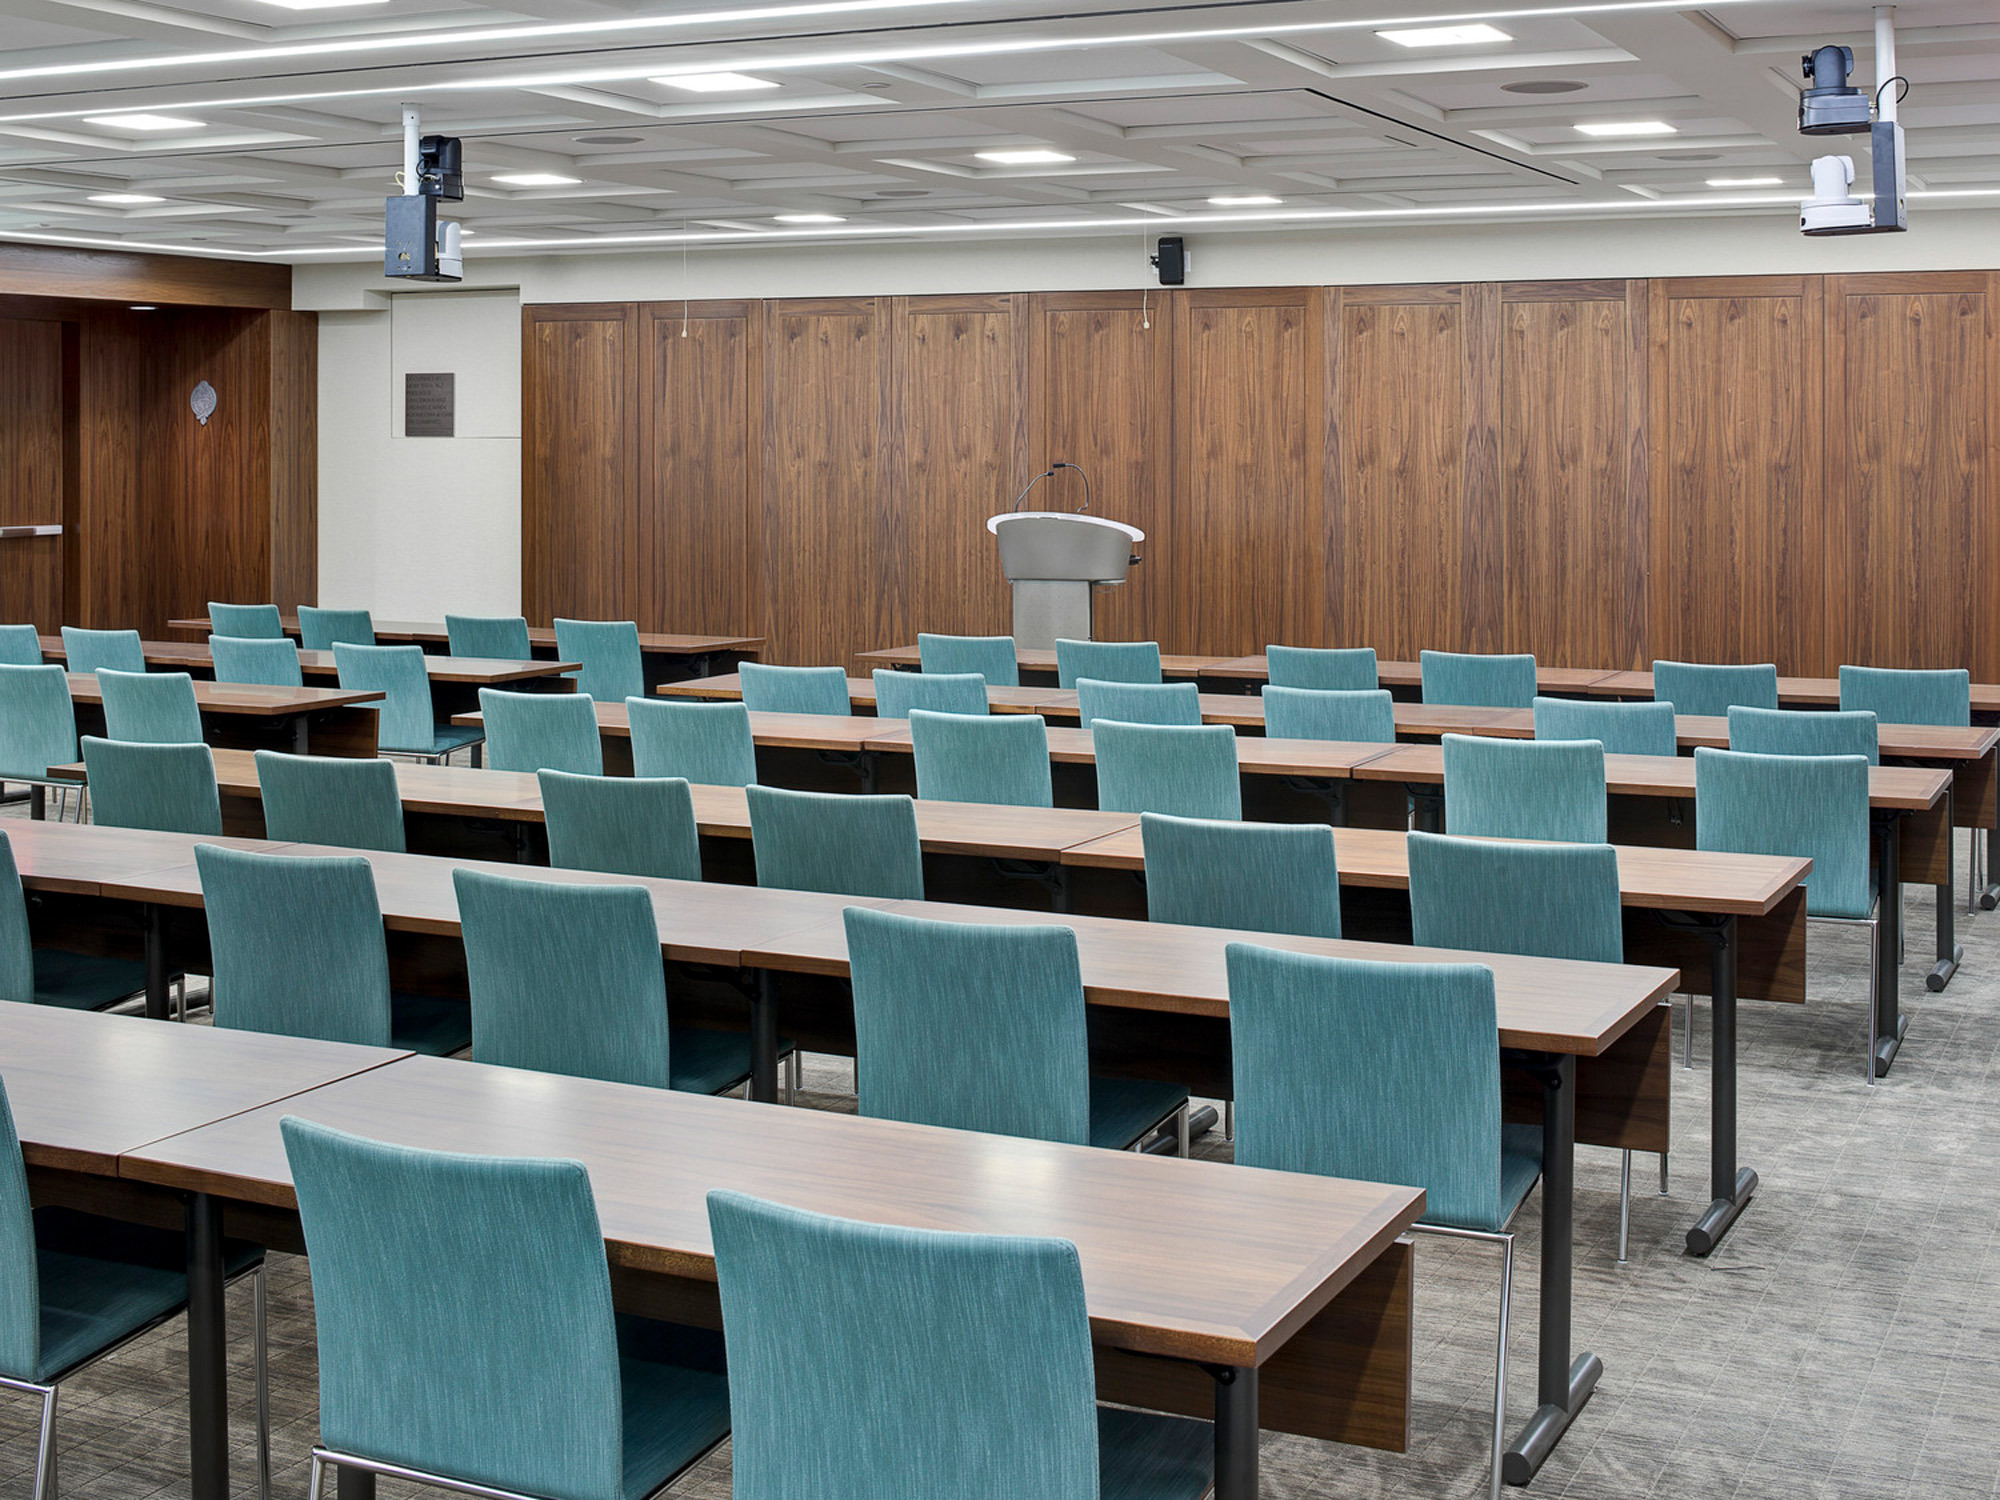 Modern conference room featuring rows of turquoise chairs, dark wood-paneled walls, and a sleek lecturer's podium. Overhead, linear lighting complements the room's clean lines.